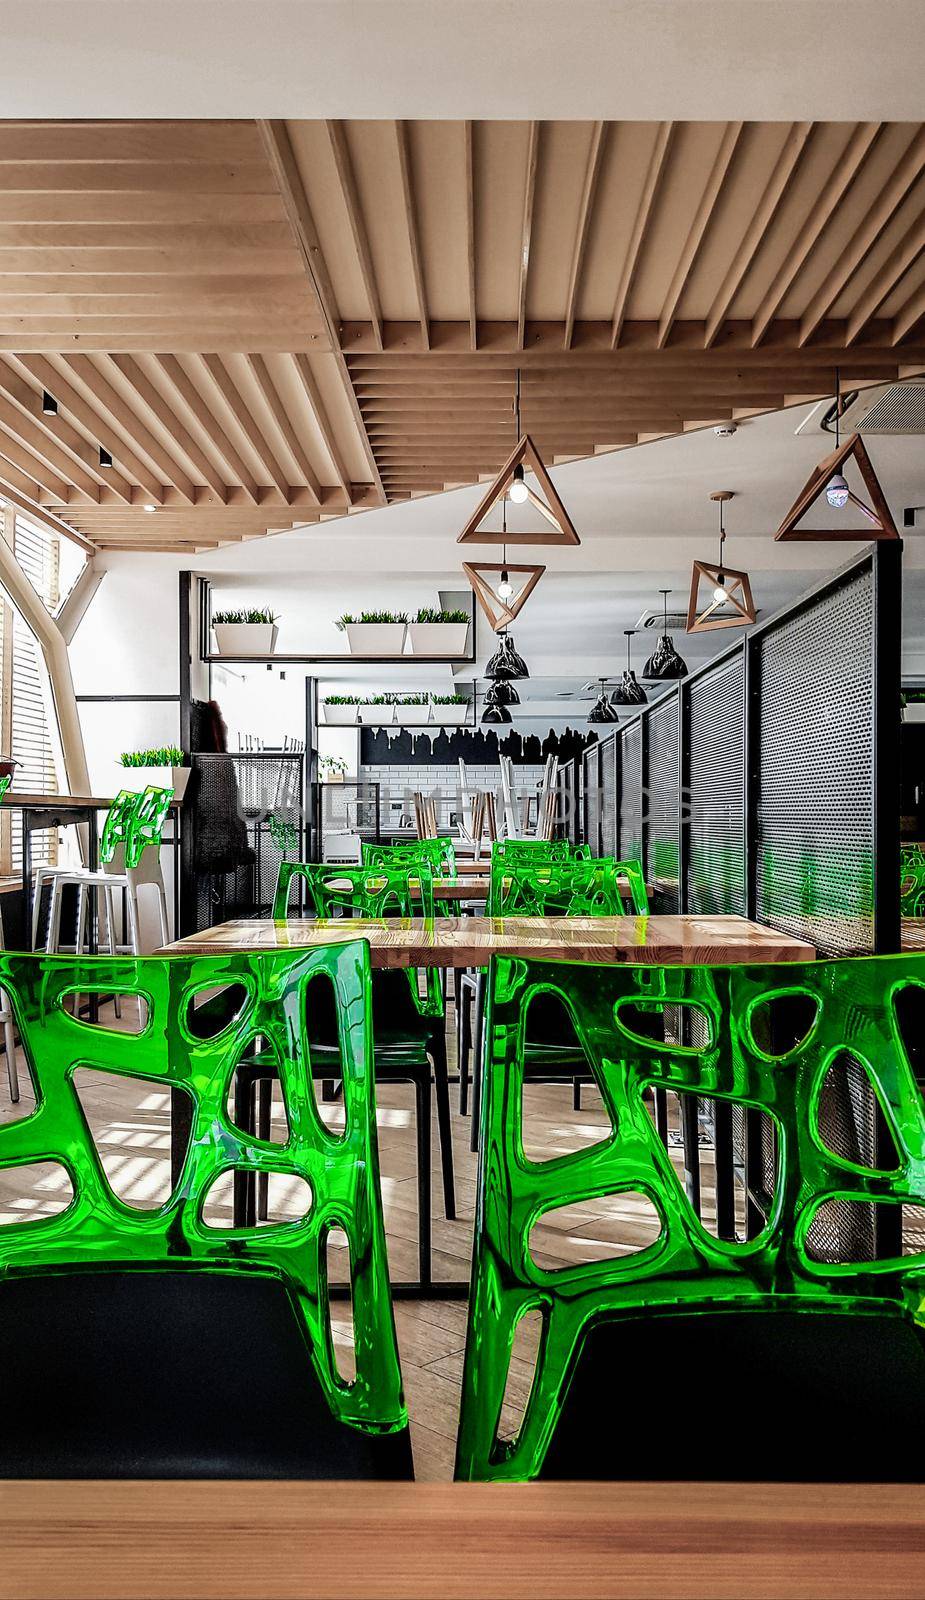 Cafeteria, no people dining room with wooden tables and green chairs. Interior with wood and metal elements. Modern dining areas with window lighting. Ukraine, Kiev - February 19, 2021.